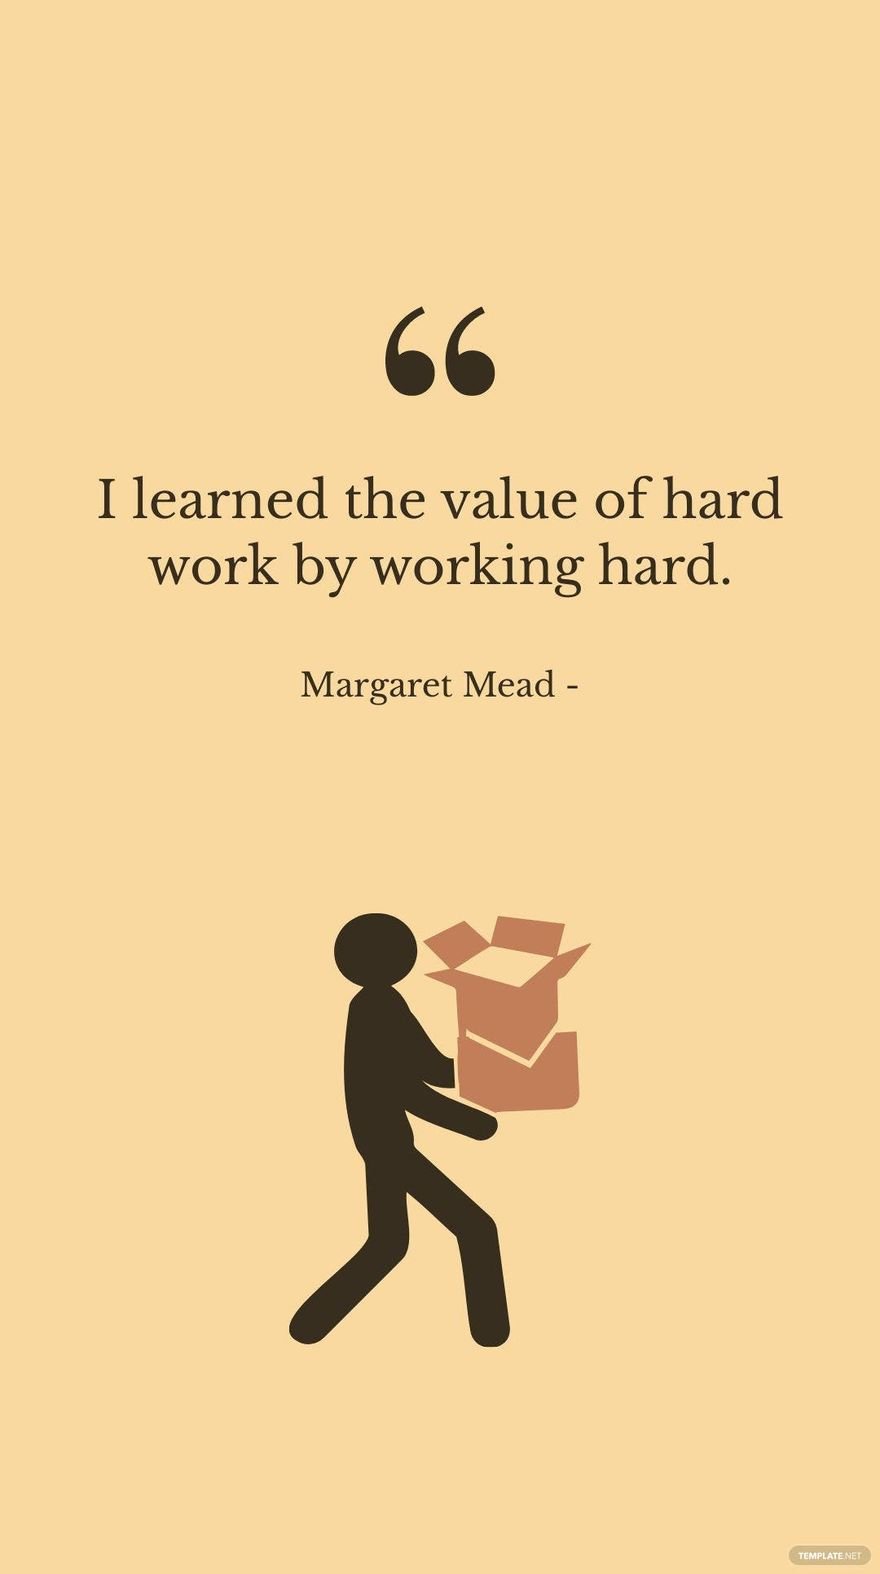 Margaret Mead - I learned the value of hard work by working hard